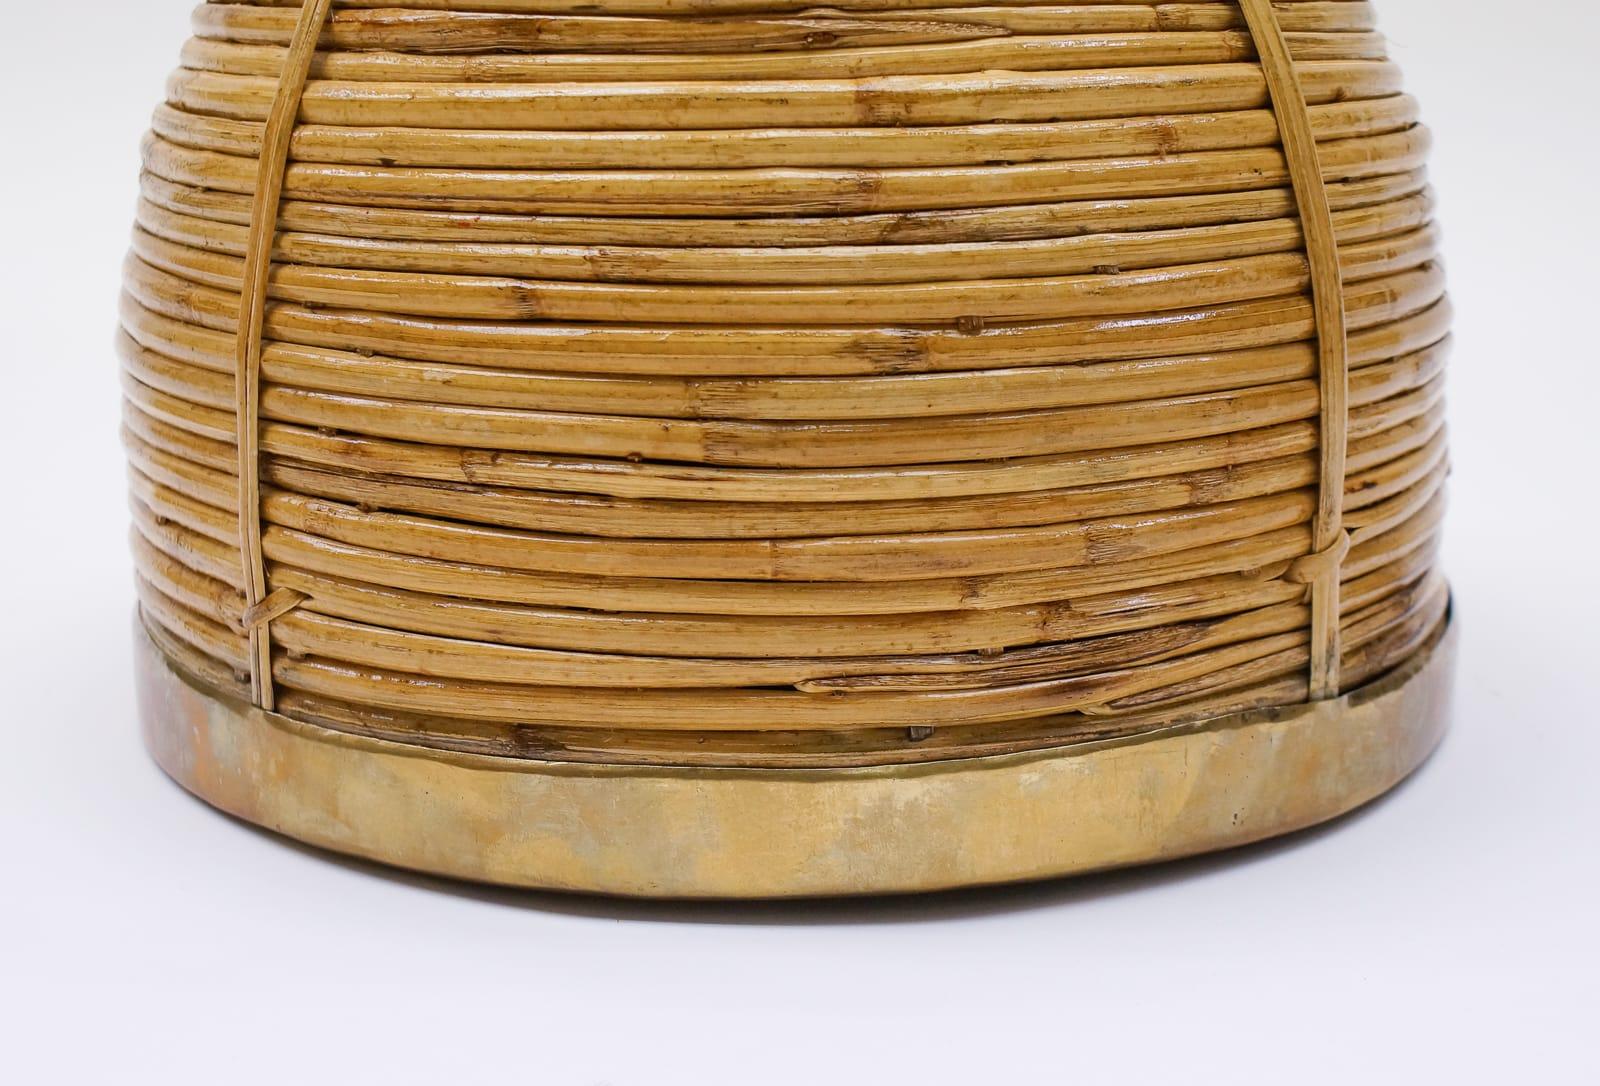 Large Rattan and Brass Midcentury Handcrafted Bowl, Austria, 1950s For Sale 3